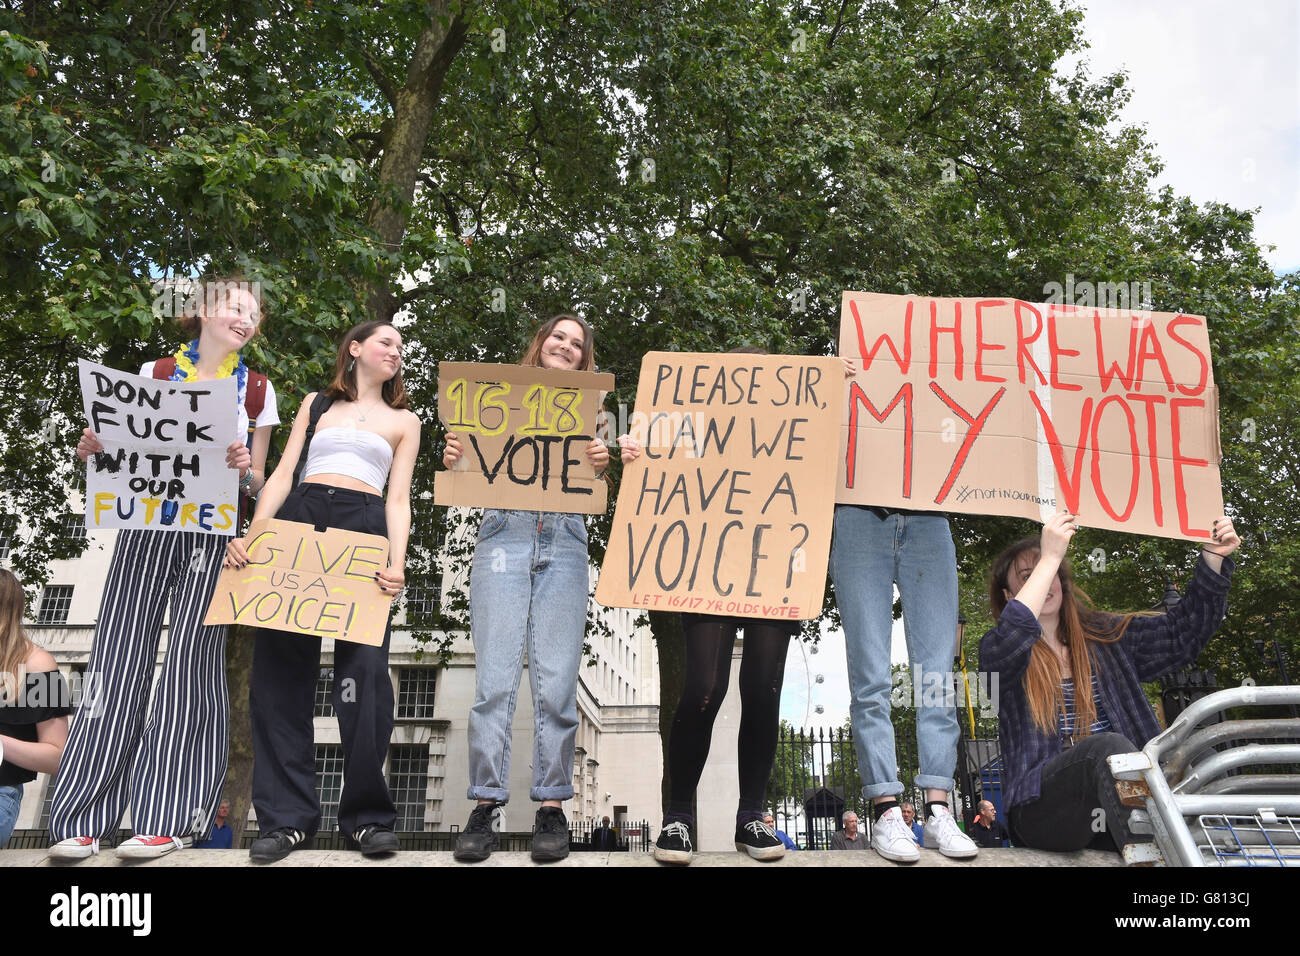 Teenagers protest against Brexit and the right of 16-17 year olds to vote, Opposite Number 10 Downing Street, Whitehall, London.UK Stock Photo